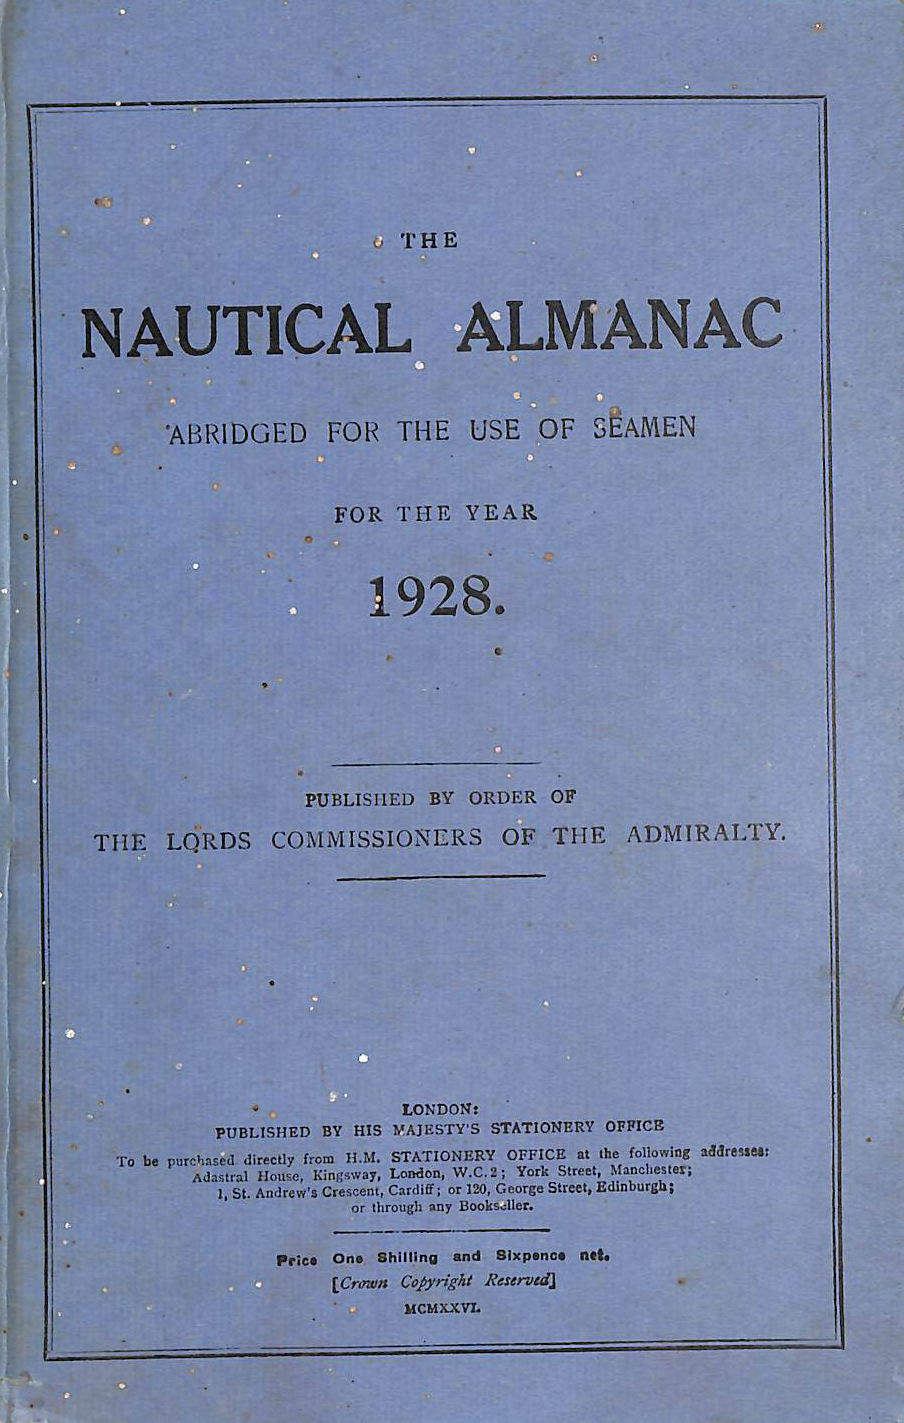 THE LORDS COMMISSIONERS OF THE ADMIRALTY. - The Nautical Almanac: Abridged For The Use Of Seamen For The Year 1928